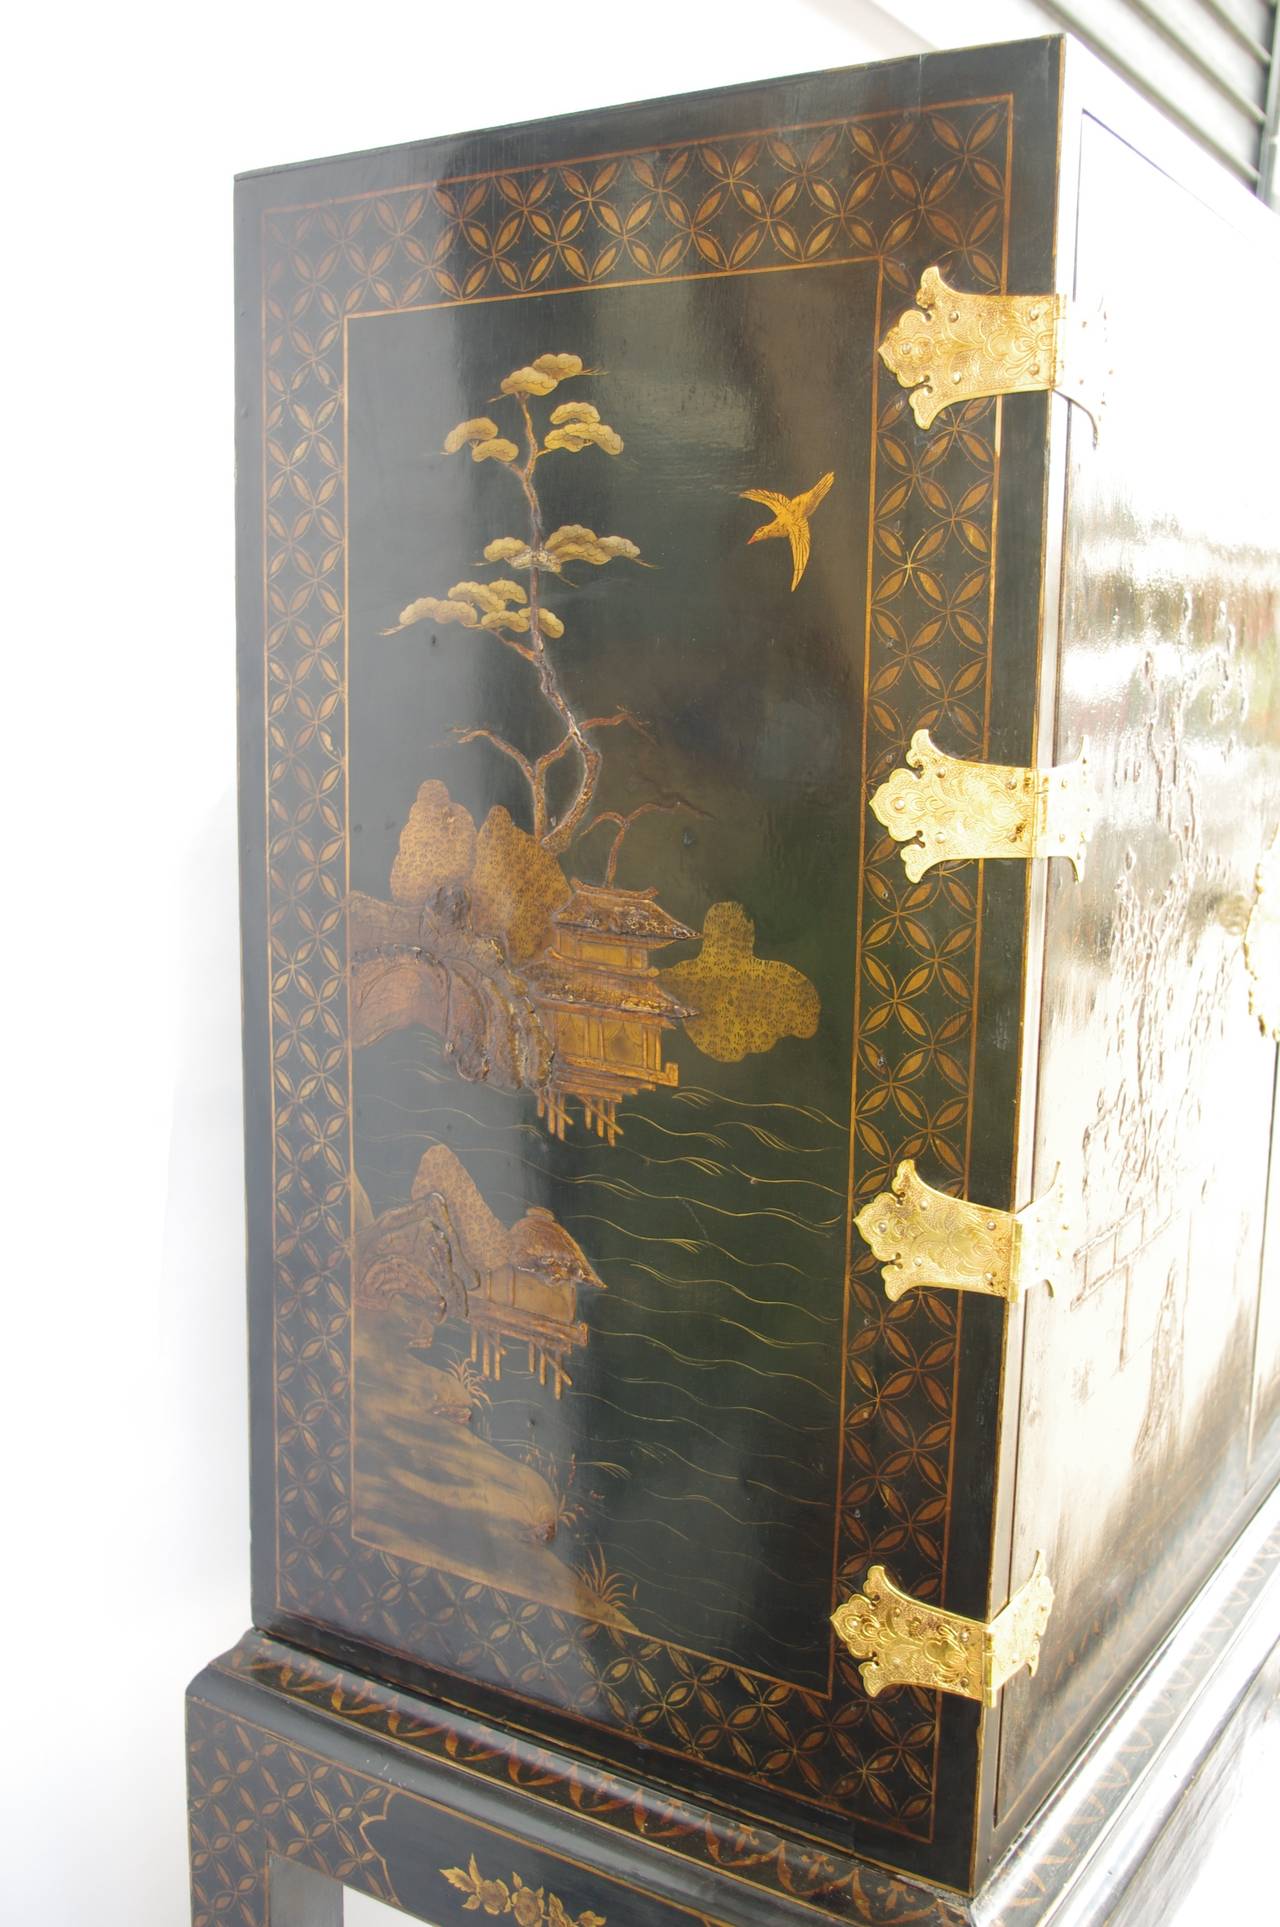 . Chinese style lacquer
. Gilt decor on black background of landscape scenes
. Gilt and chiseled bronze such as : keyhole 
. Circa 1900
. Opening on 2 doors revealing a red lacquer decor background with 7 drawers and 2 doors
. Standing on four